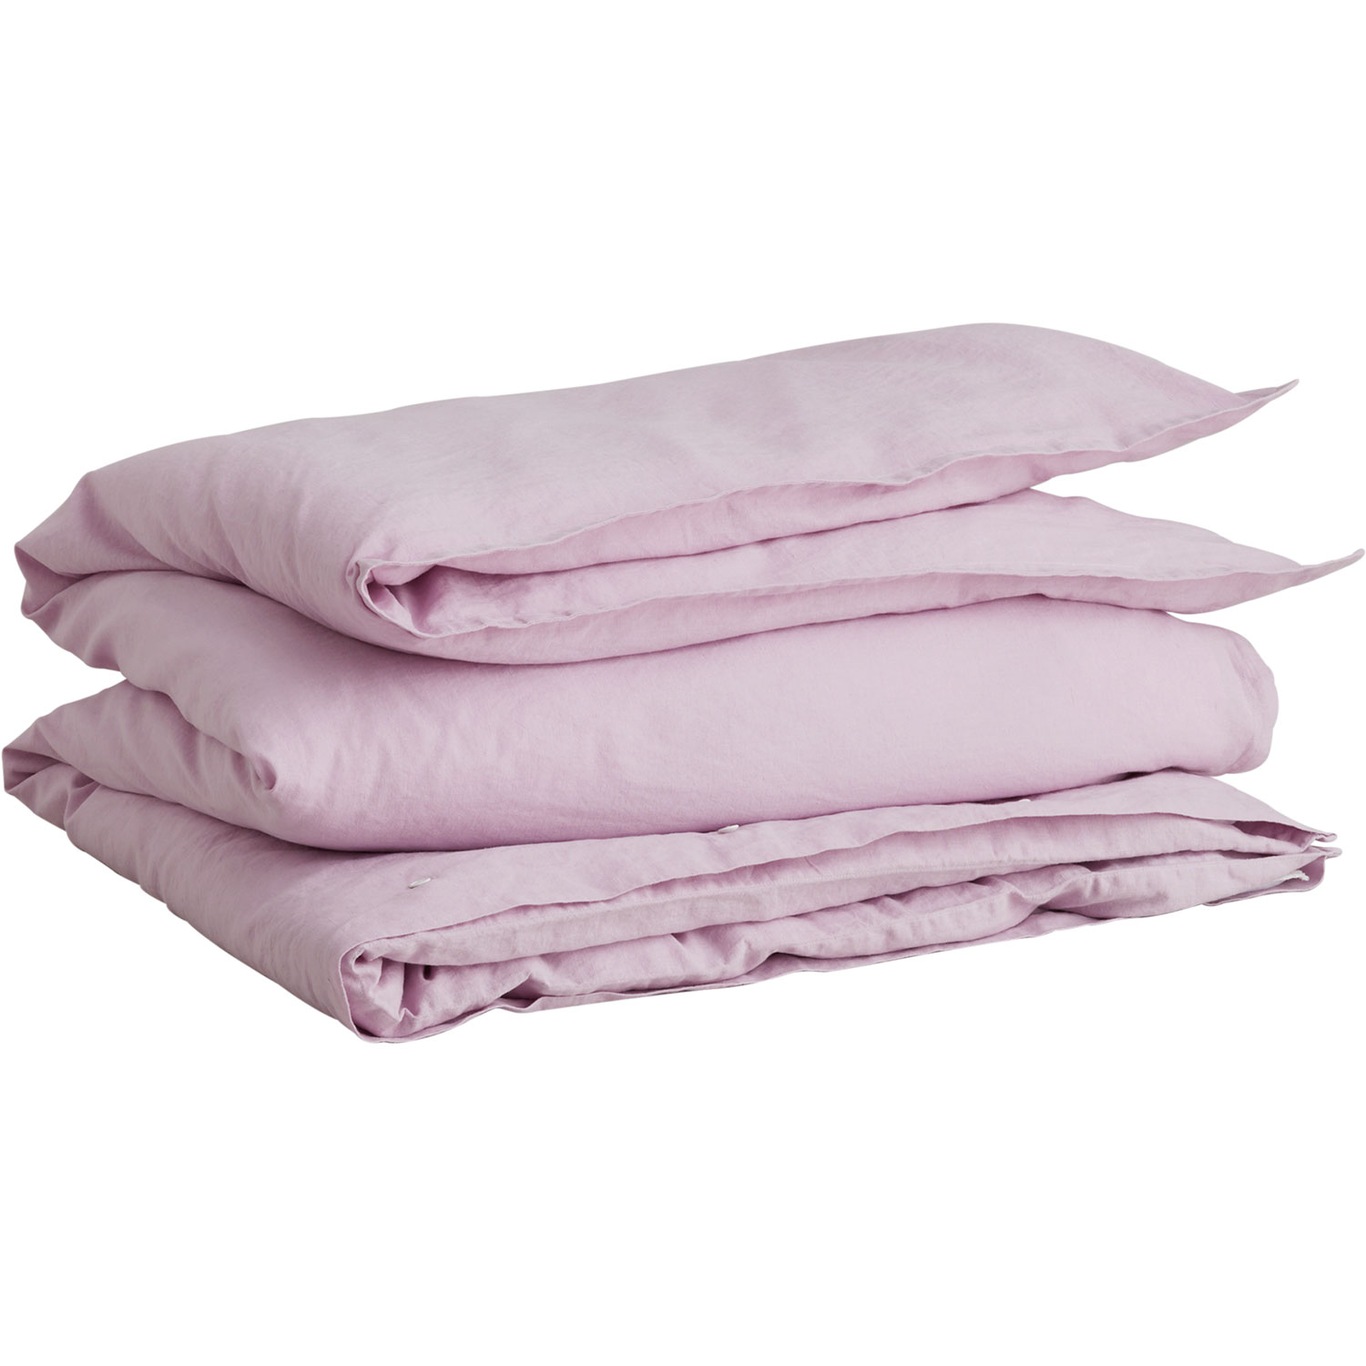 Cotton Linen Pussilakana 150x210 cm, Soothing Lilac